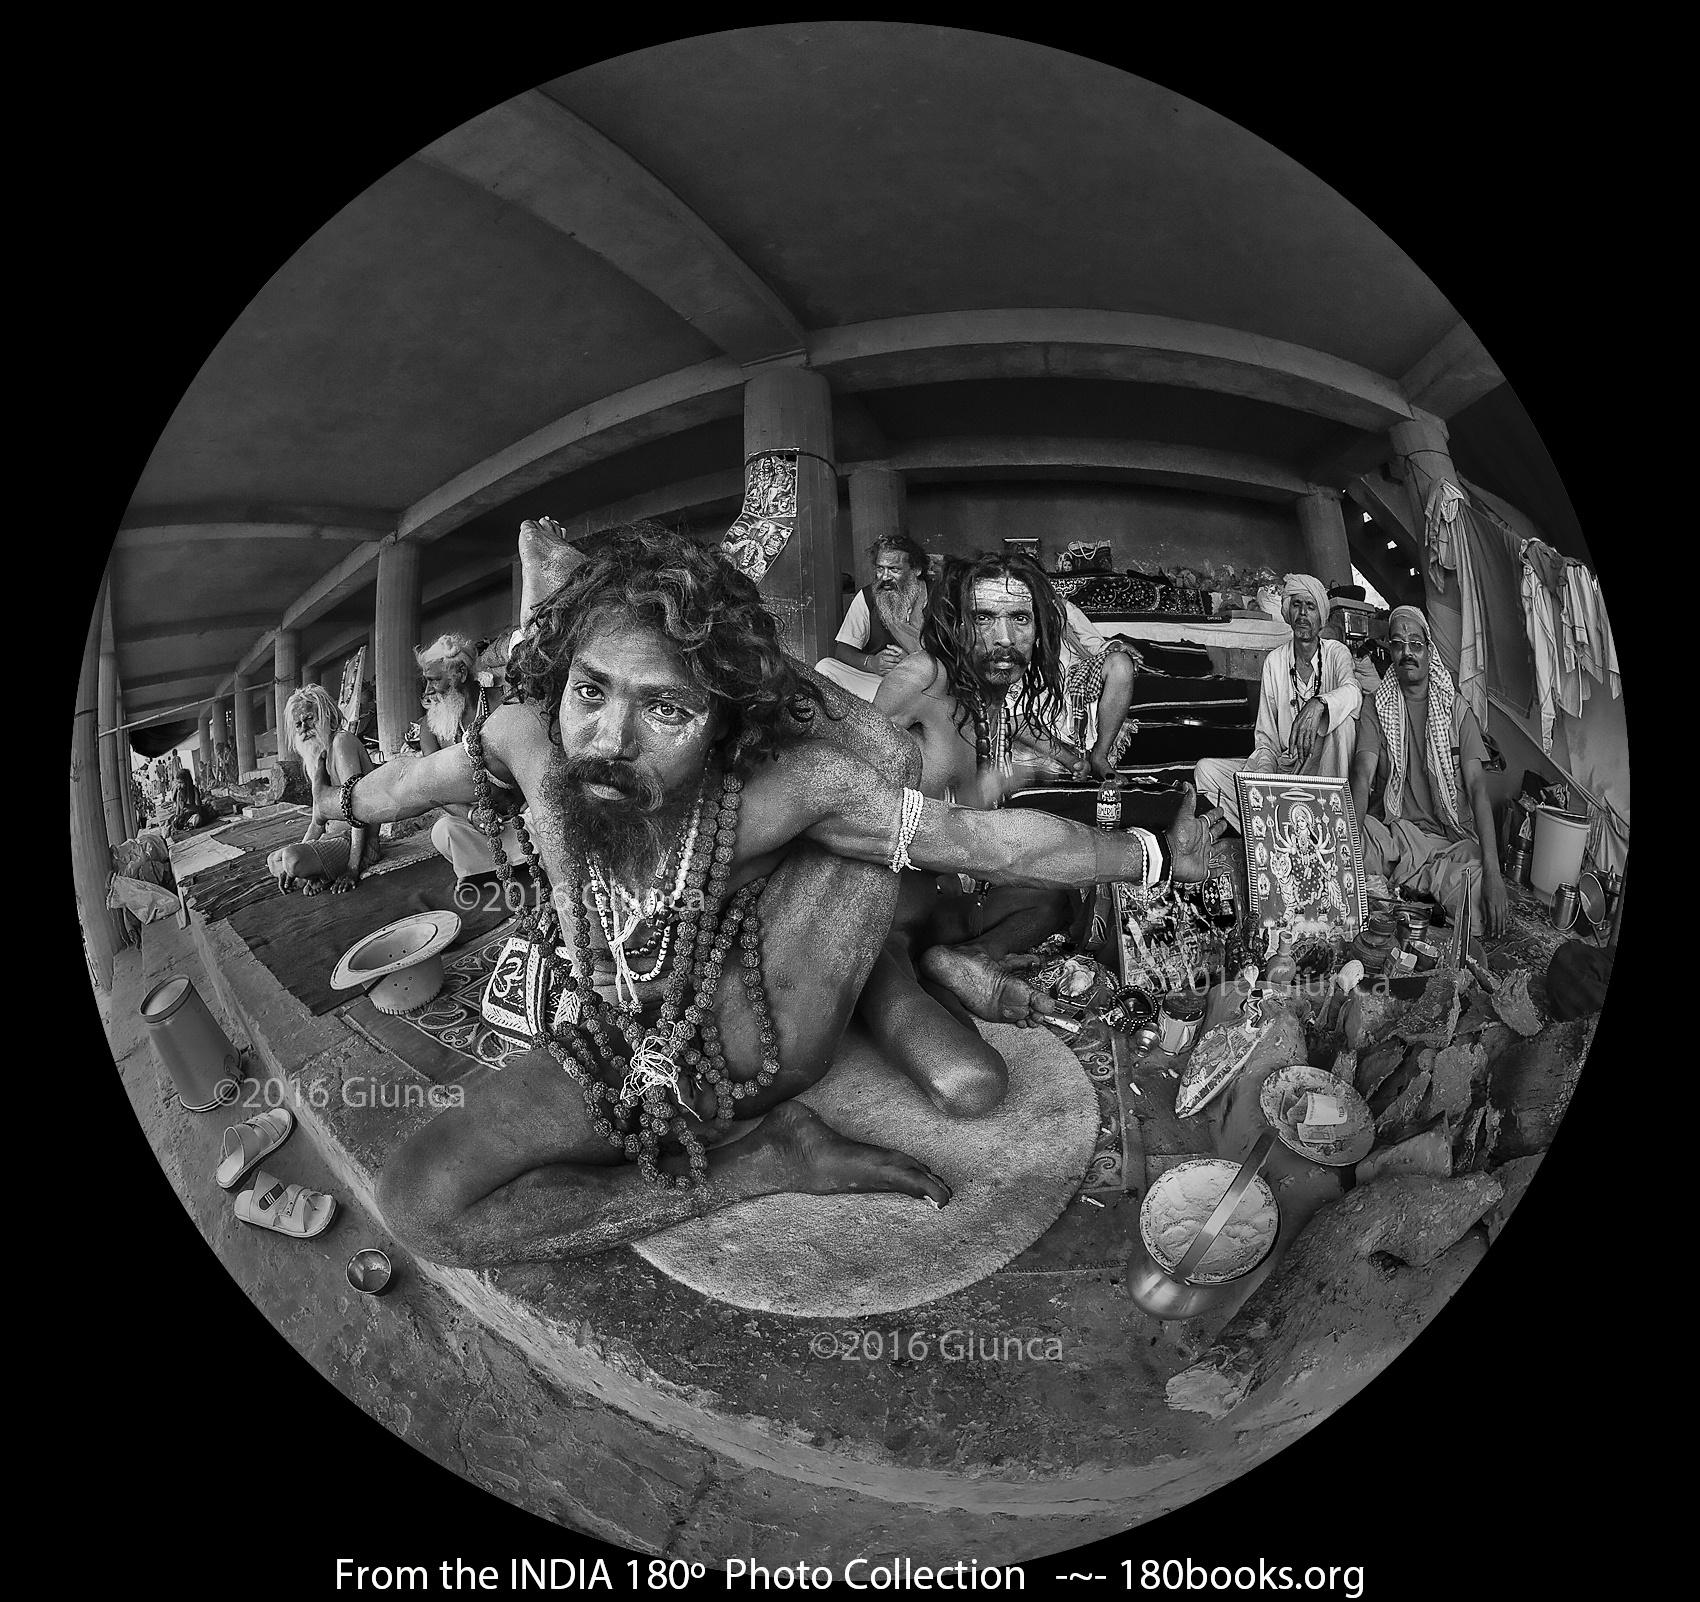 Image of A group of Aghori men